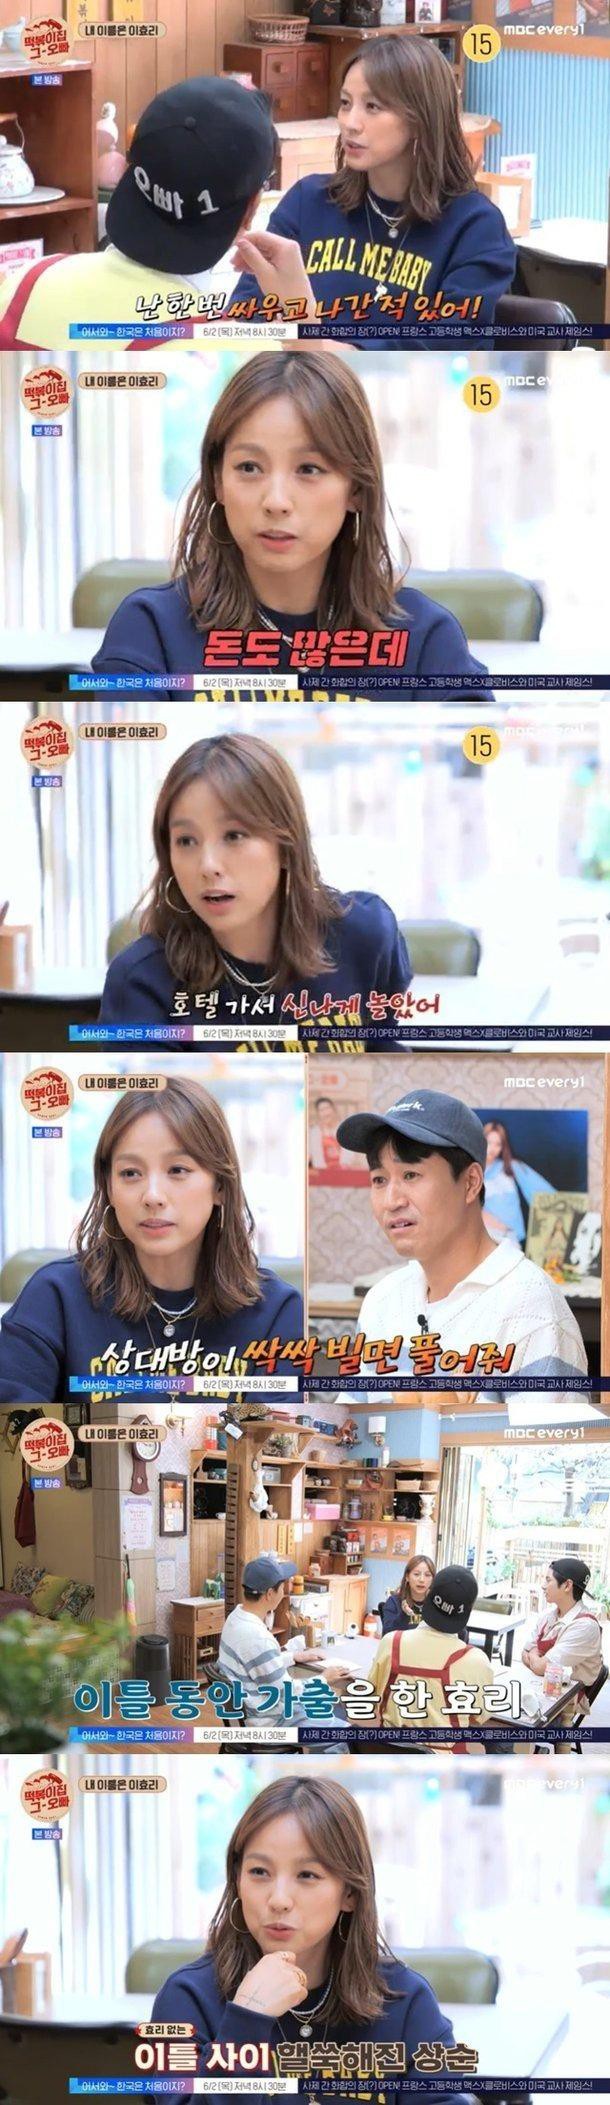 Sexy Kpop queen Lee Hyori talks about the fight with her husband - Photo 1.